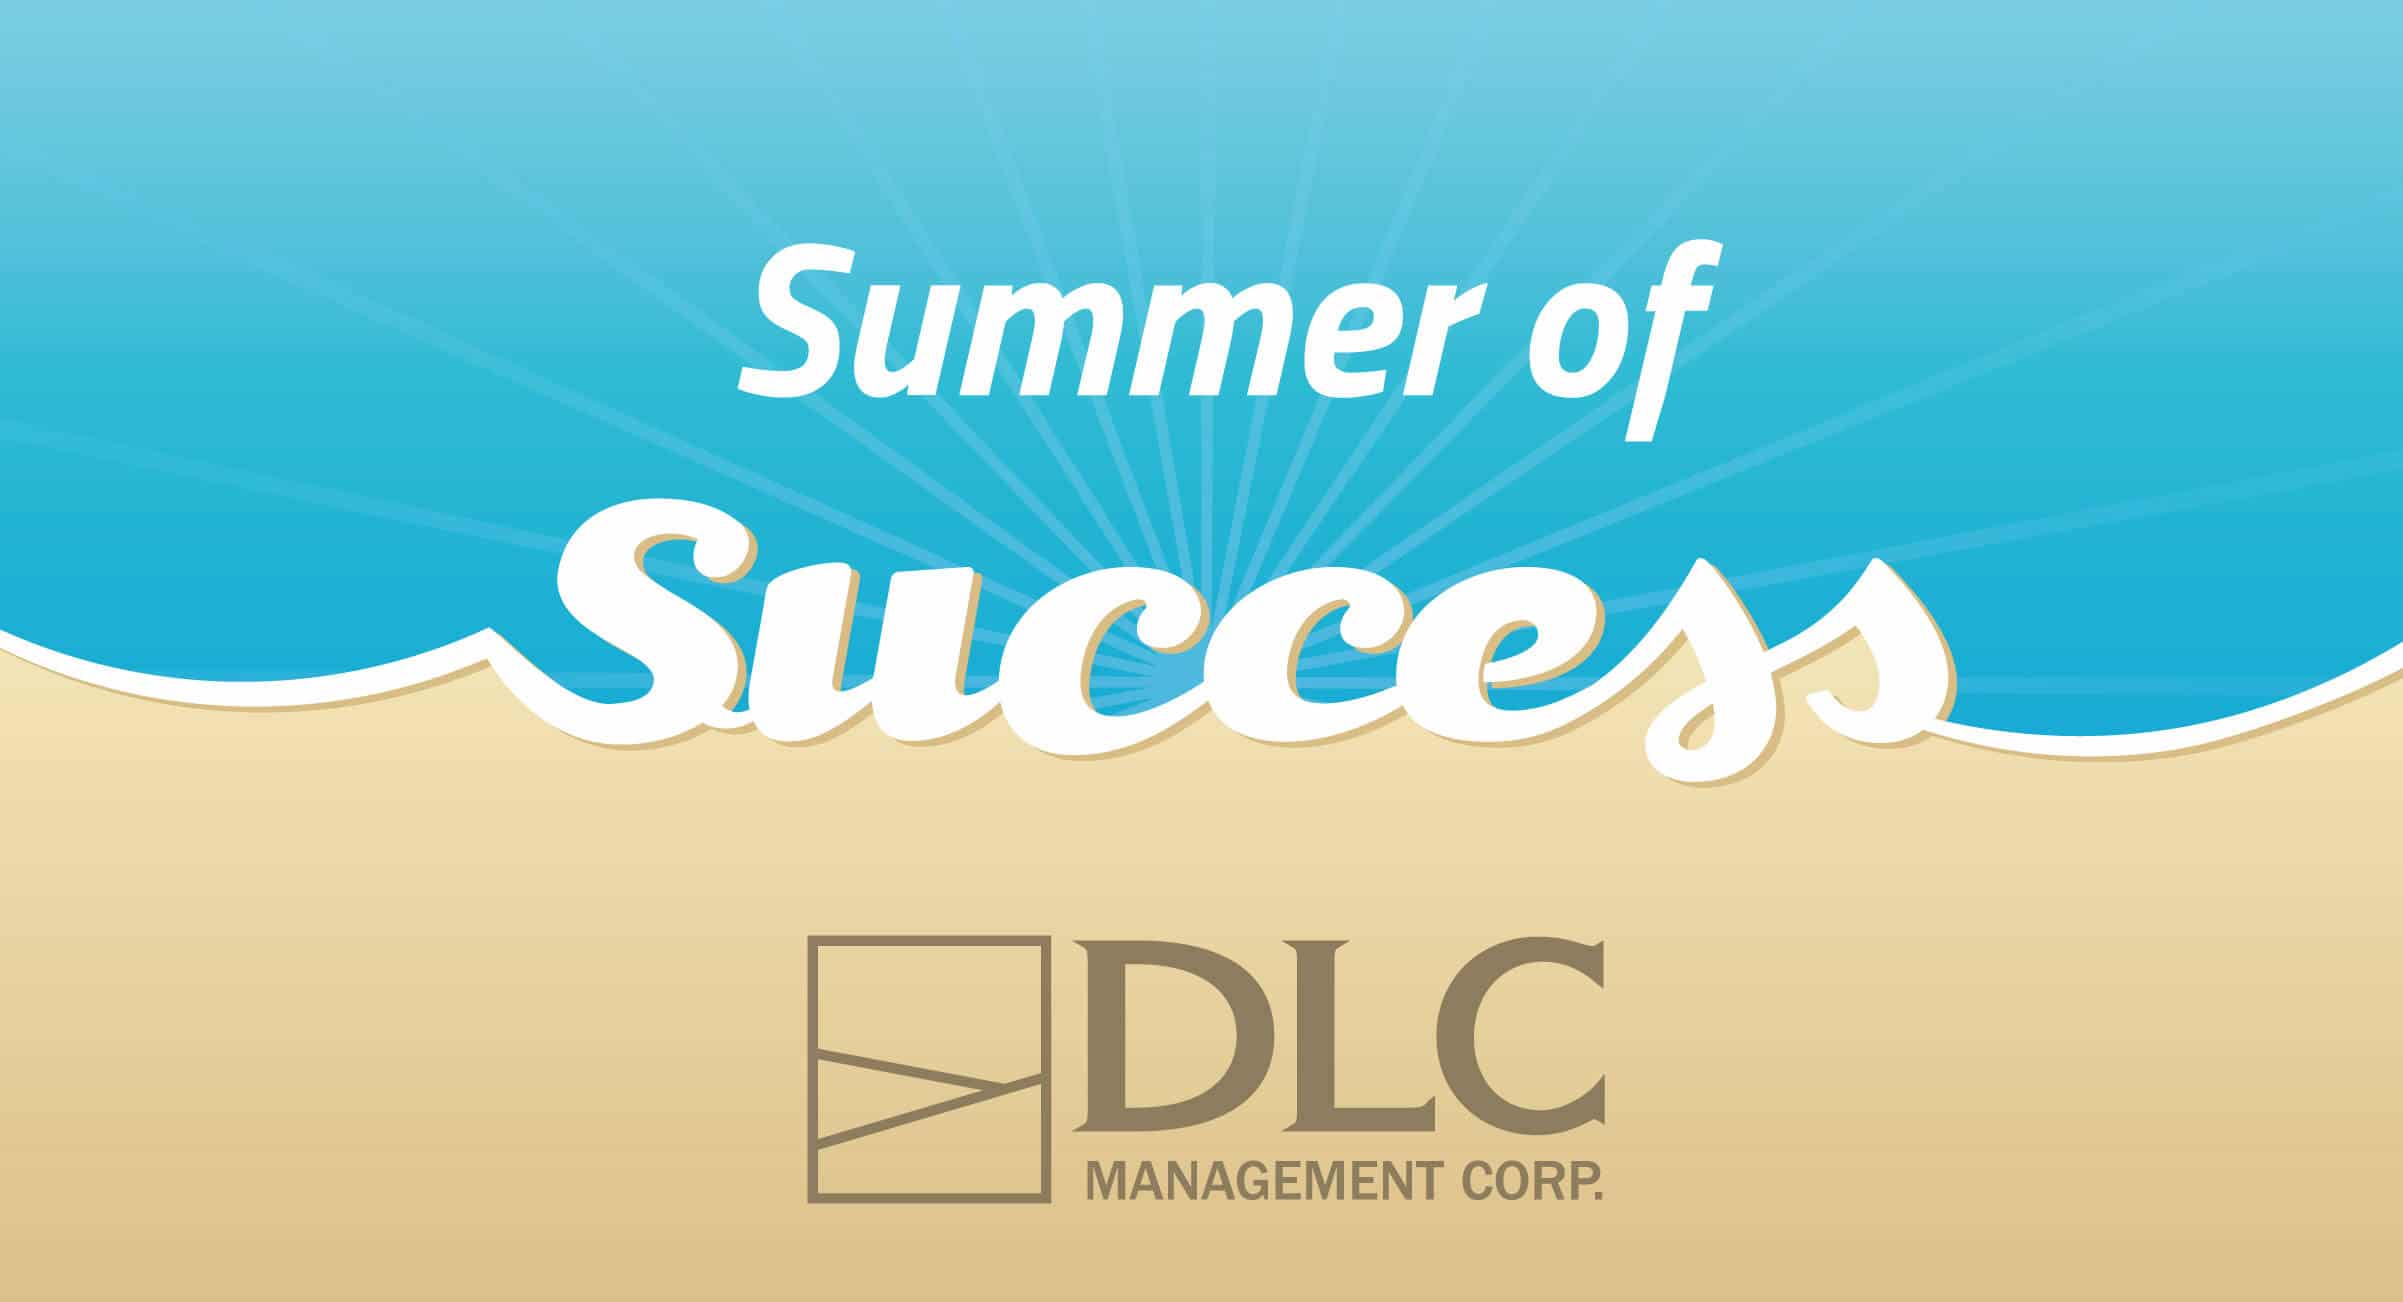 Summer of Success - beach-themed background and DLC Management Corp. logo